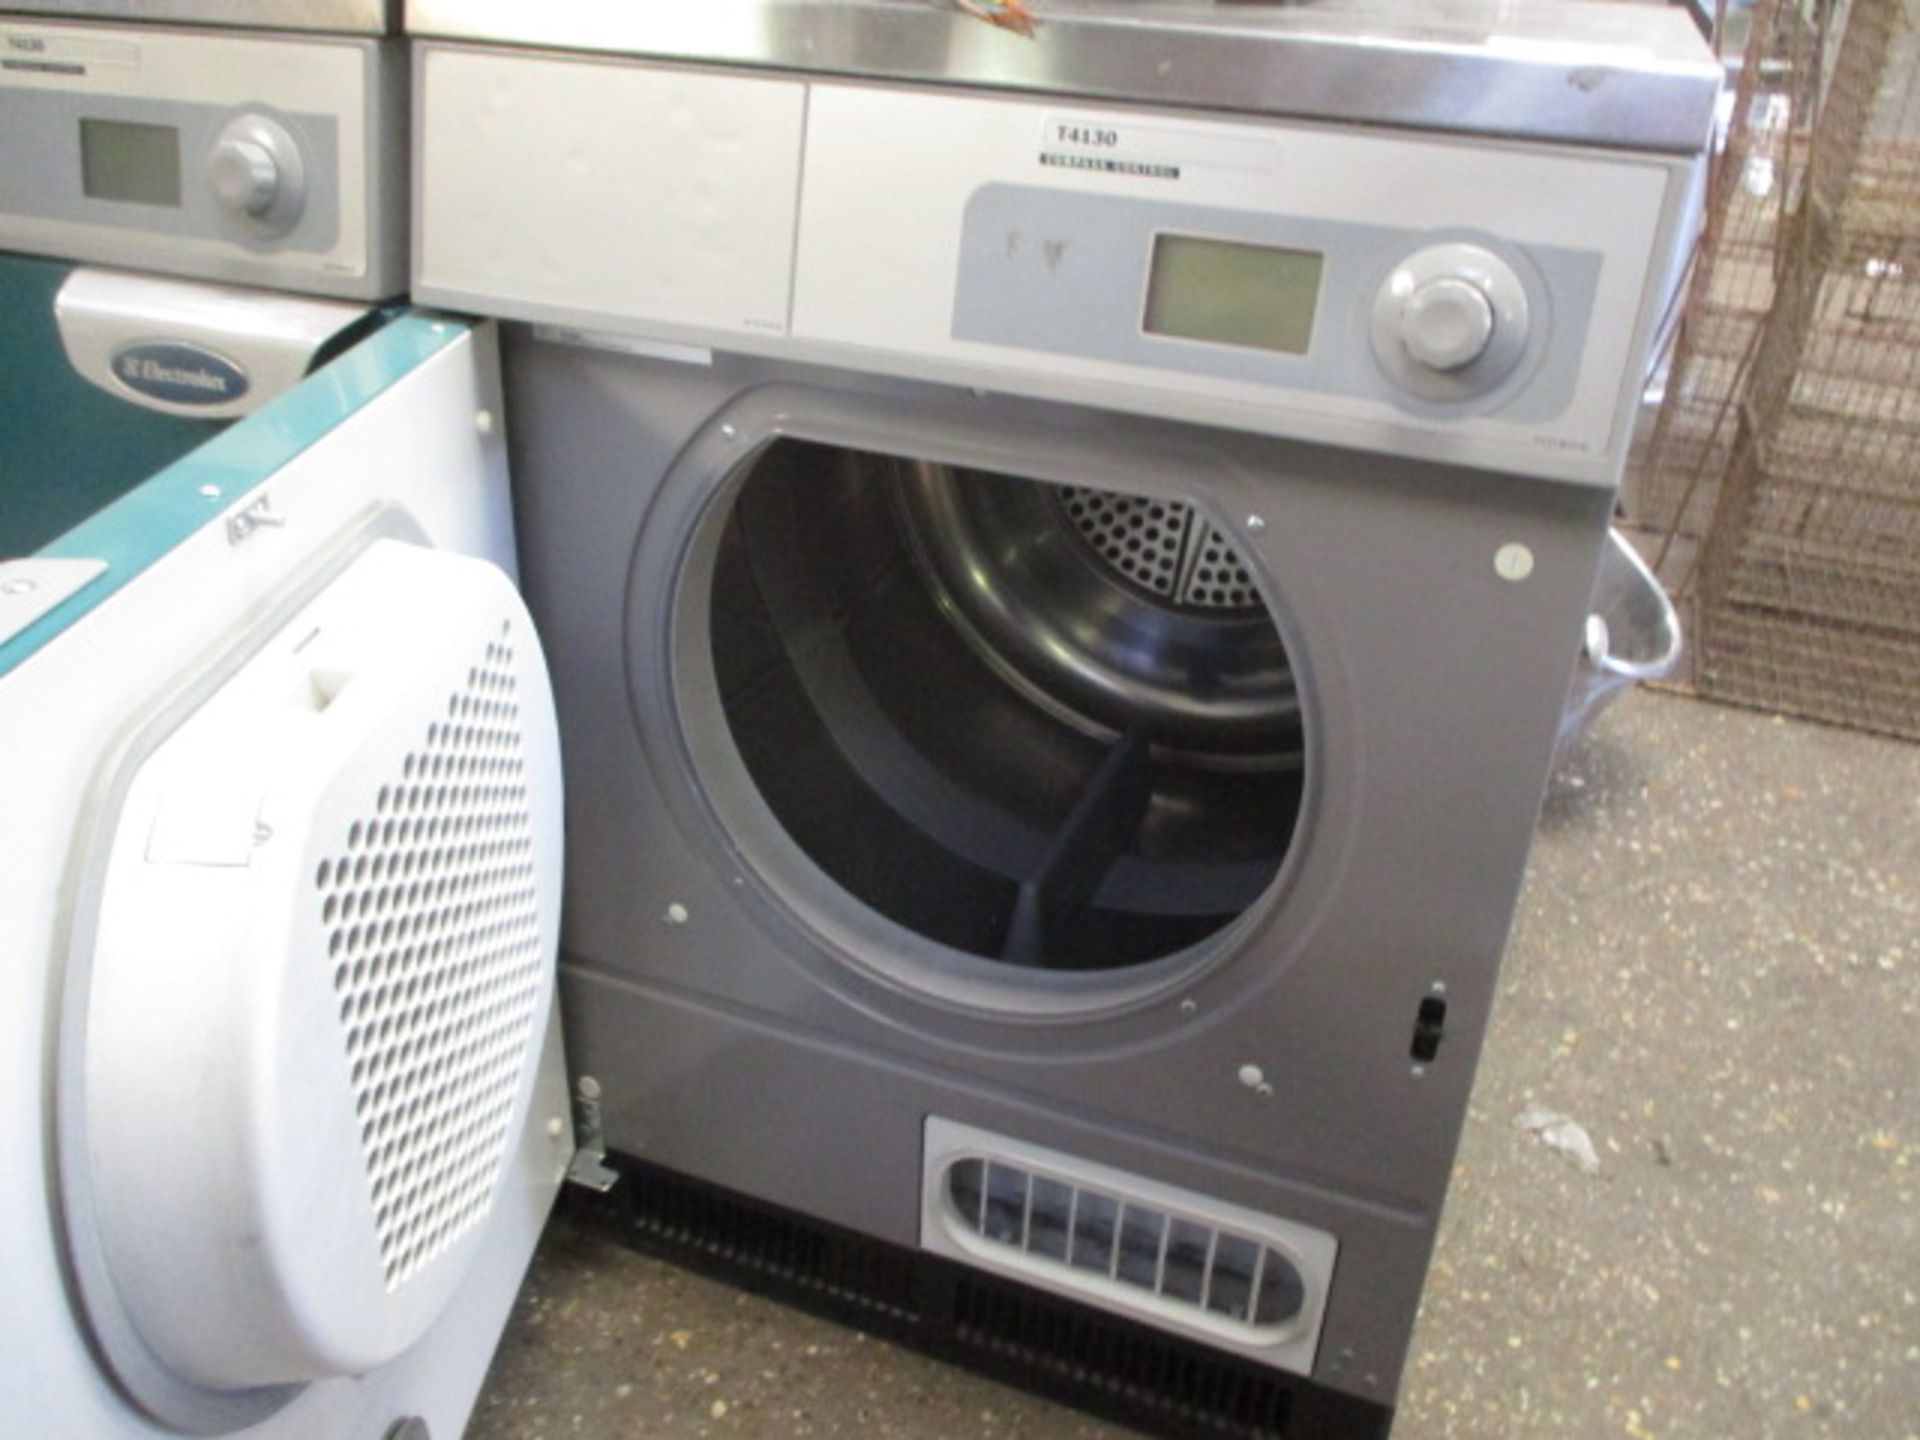 60cm Electrolux T4130 Compass Control commercial tumble dryer, single phase (ref.10) - Image 2 of 2